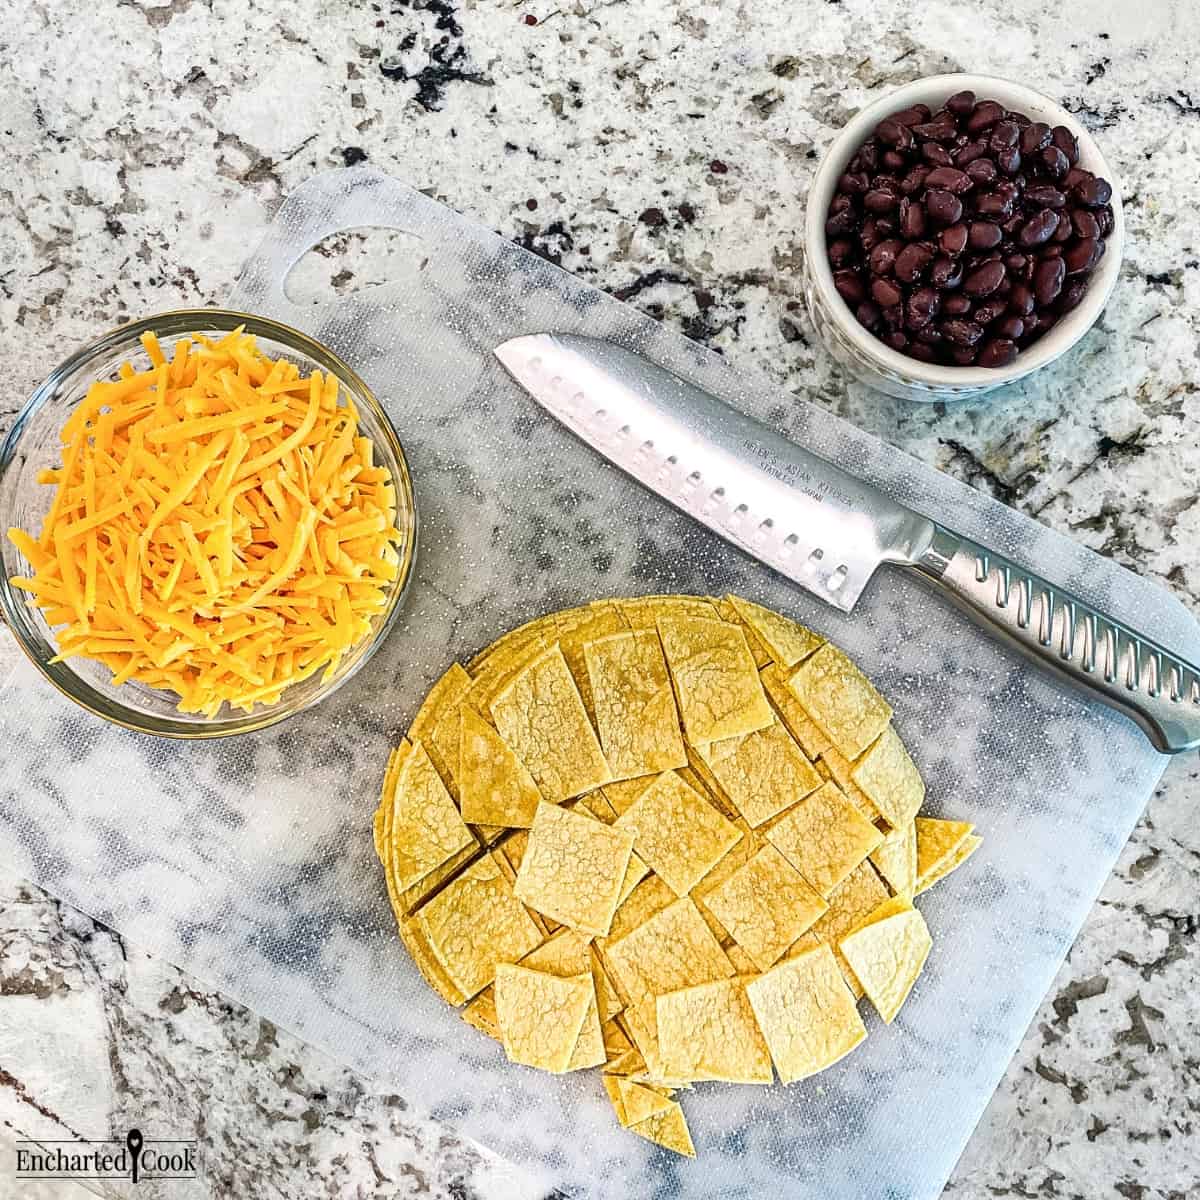 A transparent white cutting board with corn tortillas cut into bite sized pieces, drained and rinsed canned black beans, and shredded cheddar cheese.